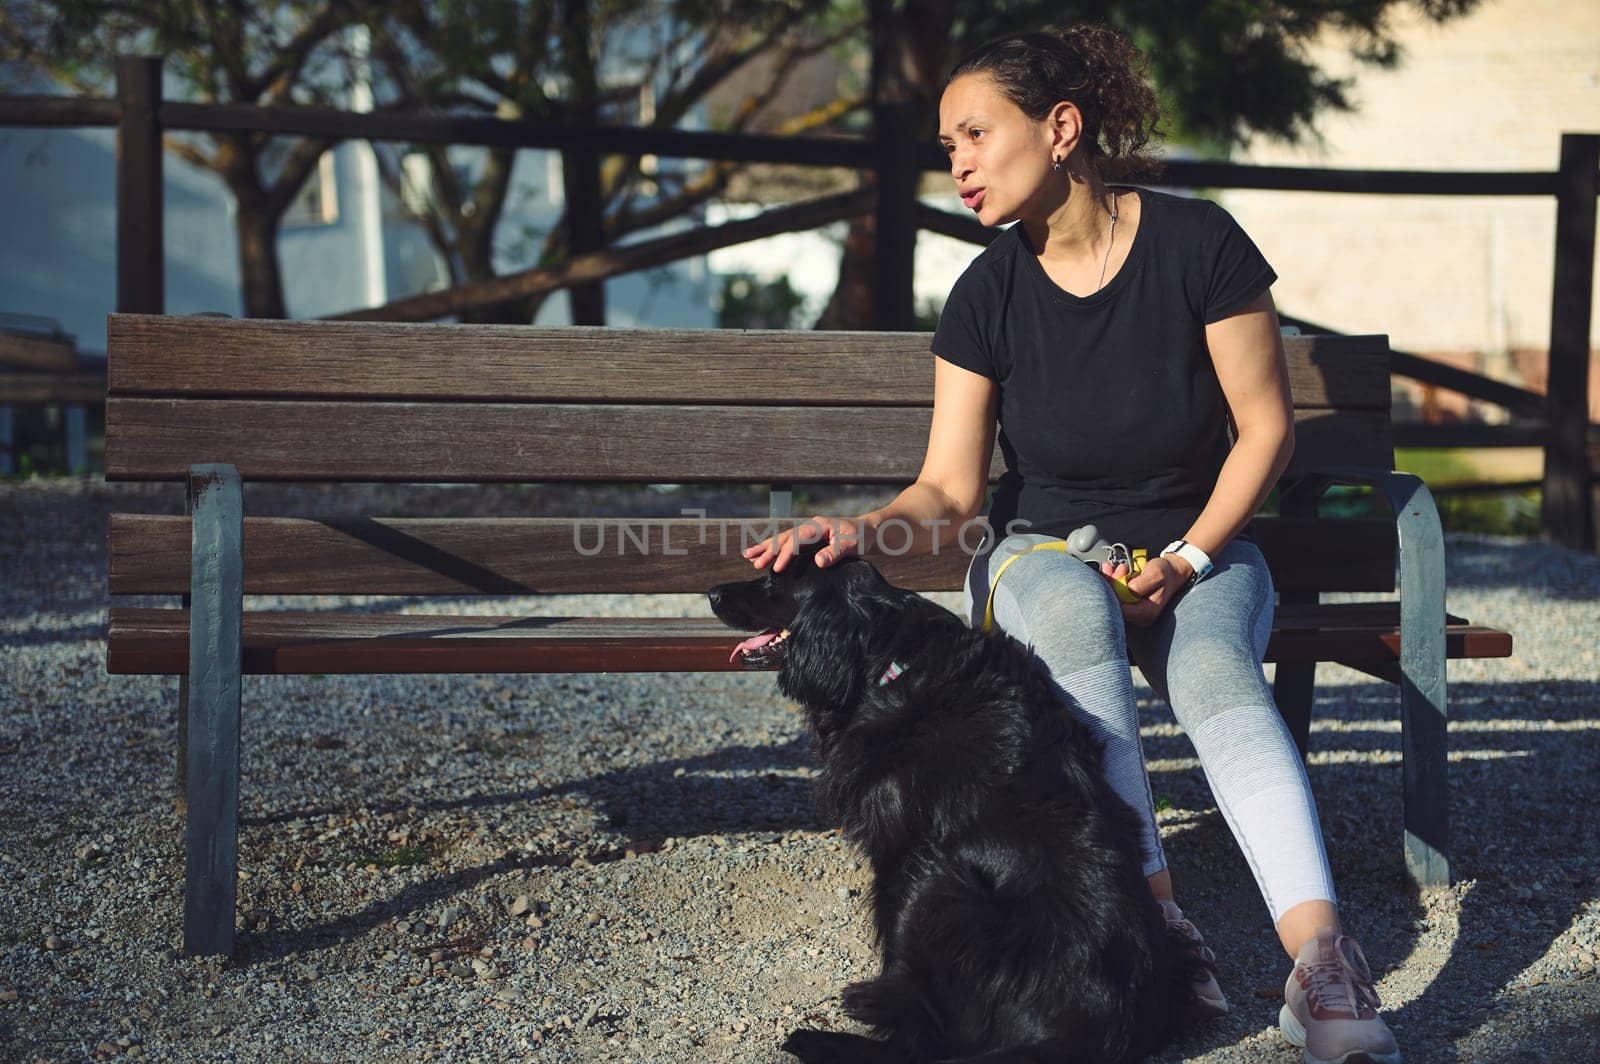 Authentic portrait of a pretty woman ang her pet, a black cocker spaniel on the bench on the nature outdoors. Woman walking dog in the summer park